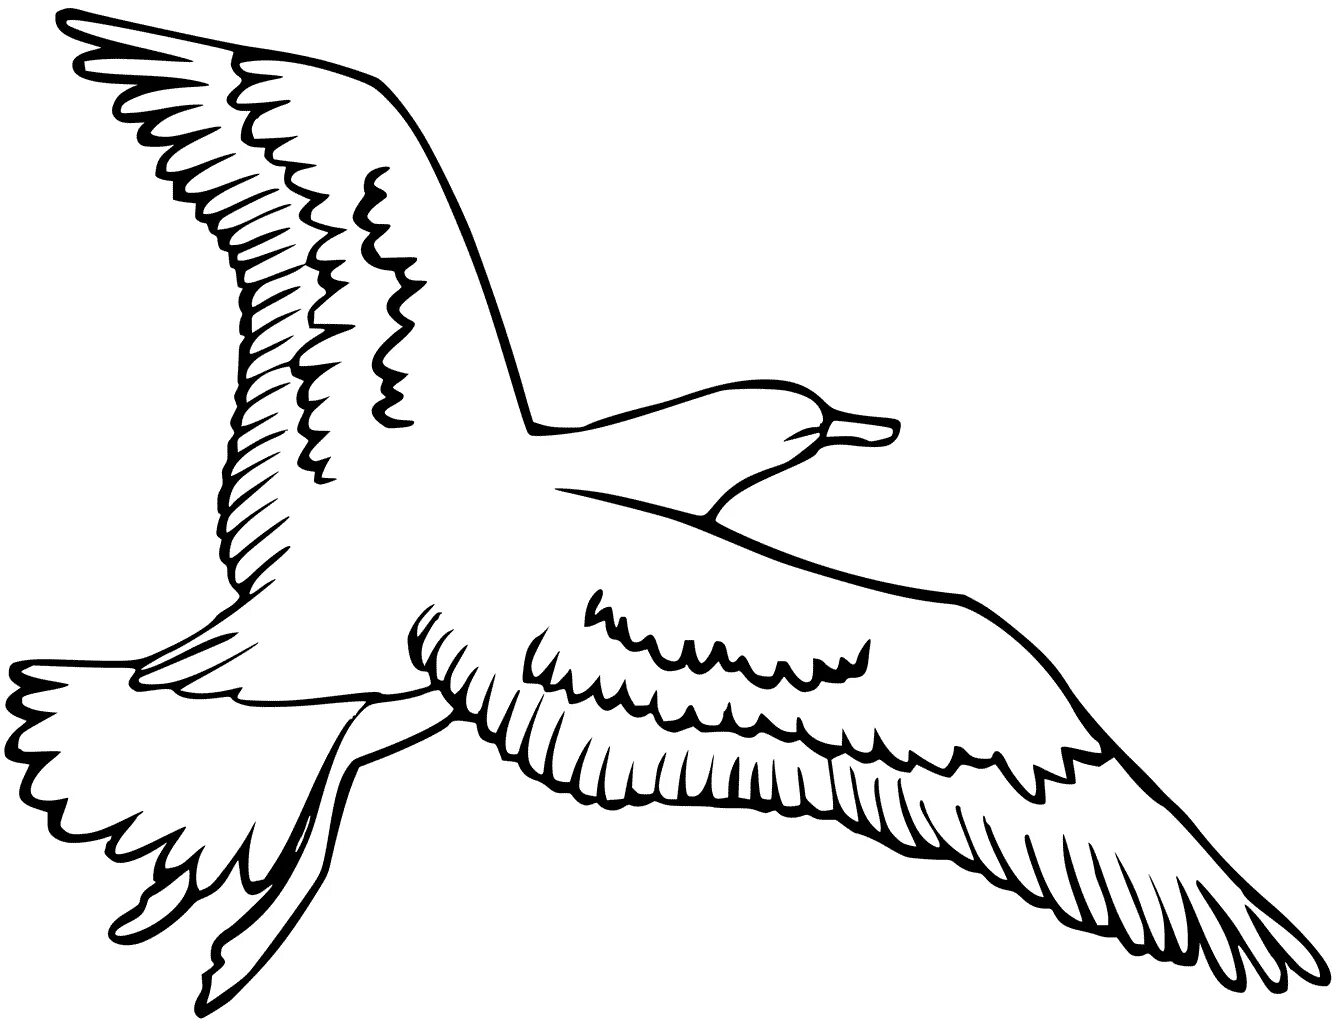 Colored seagull-explosion coloring book for children